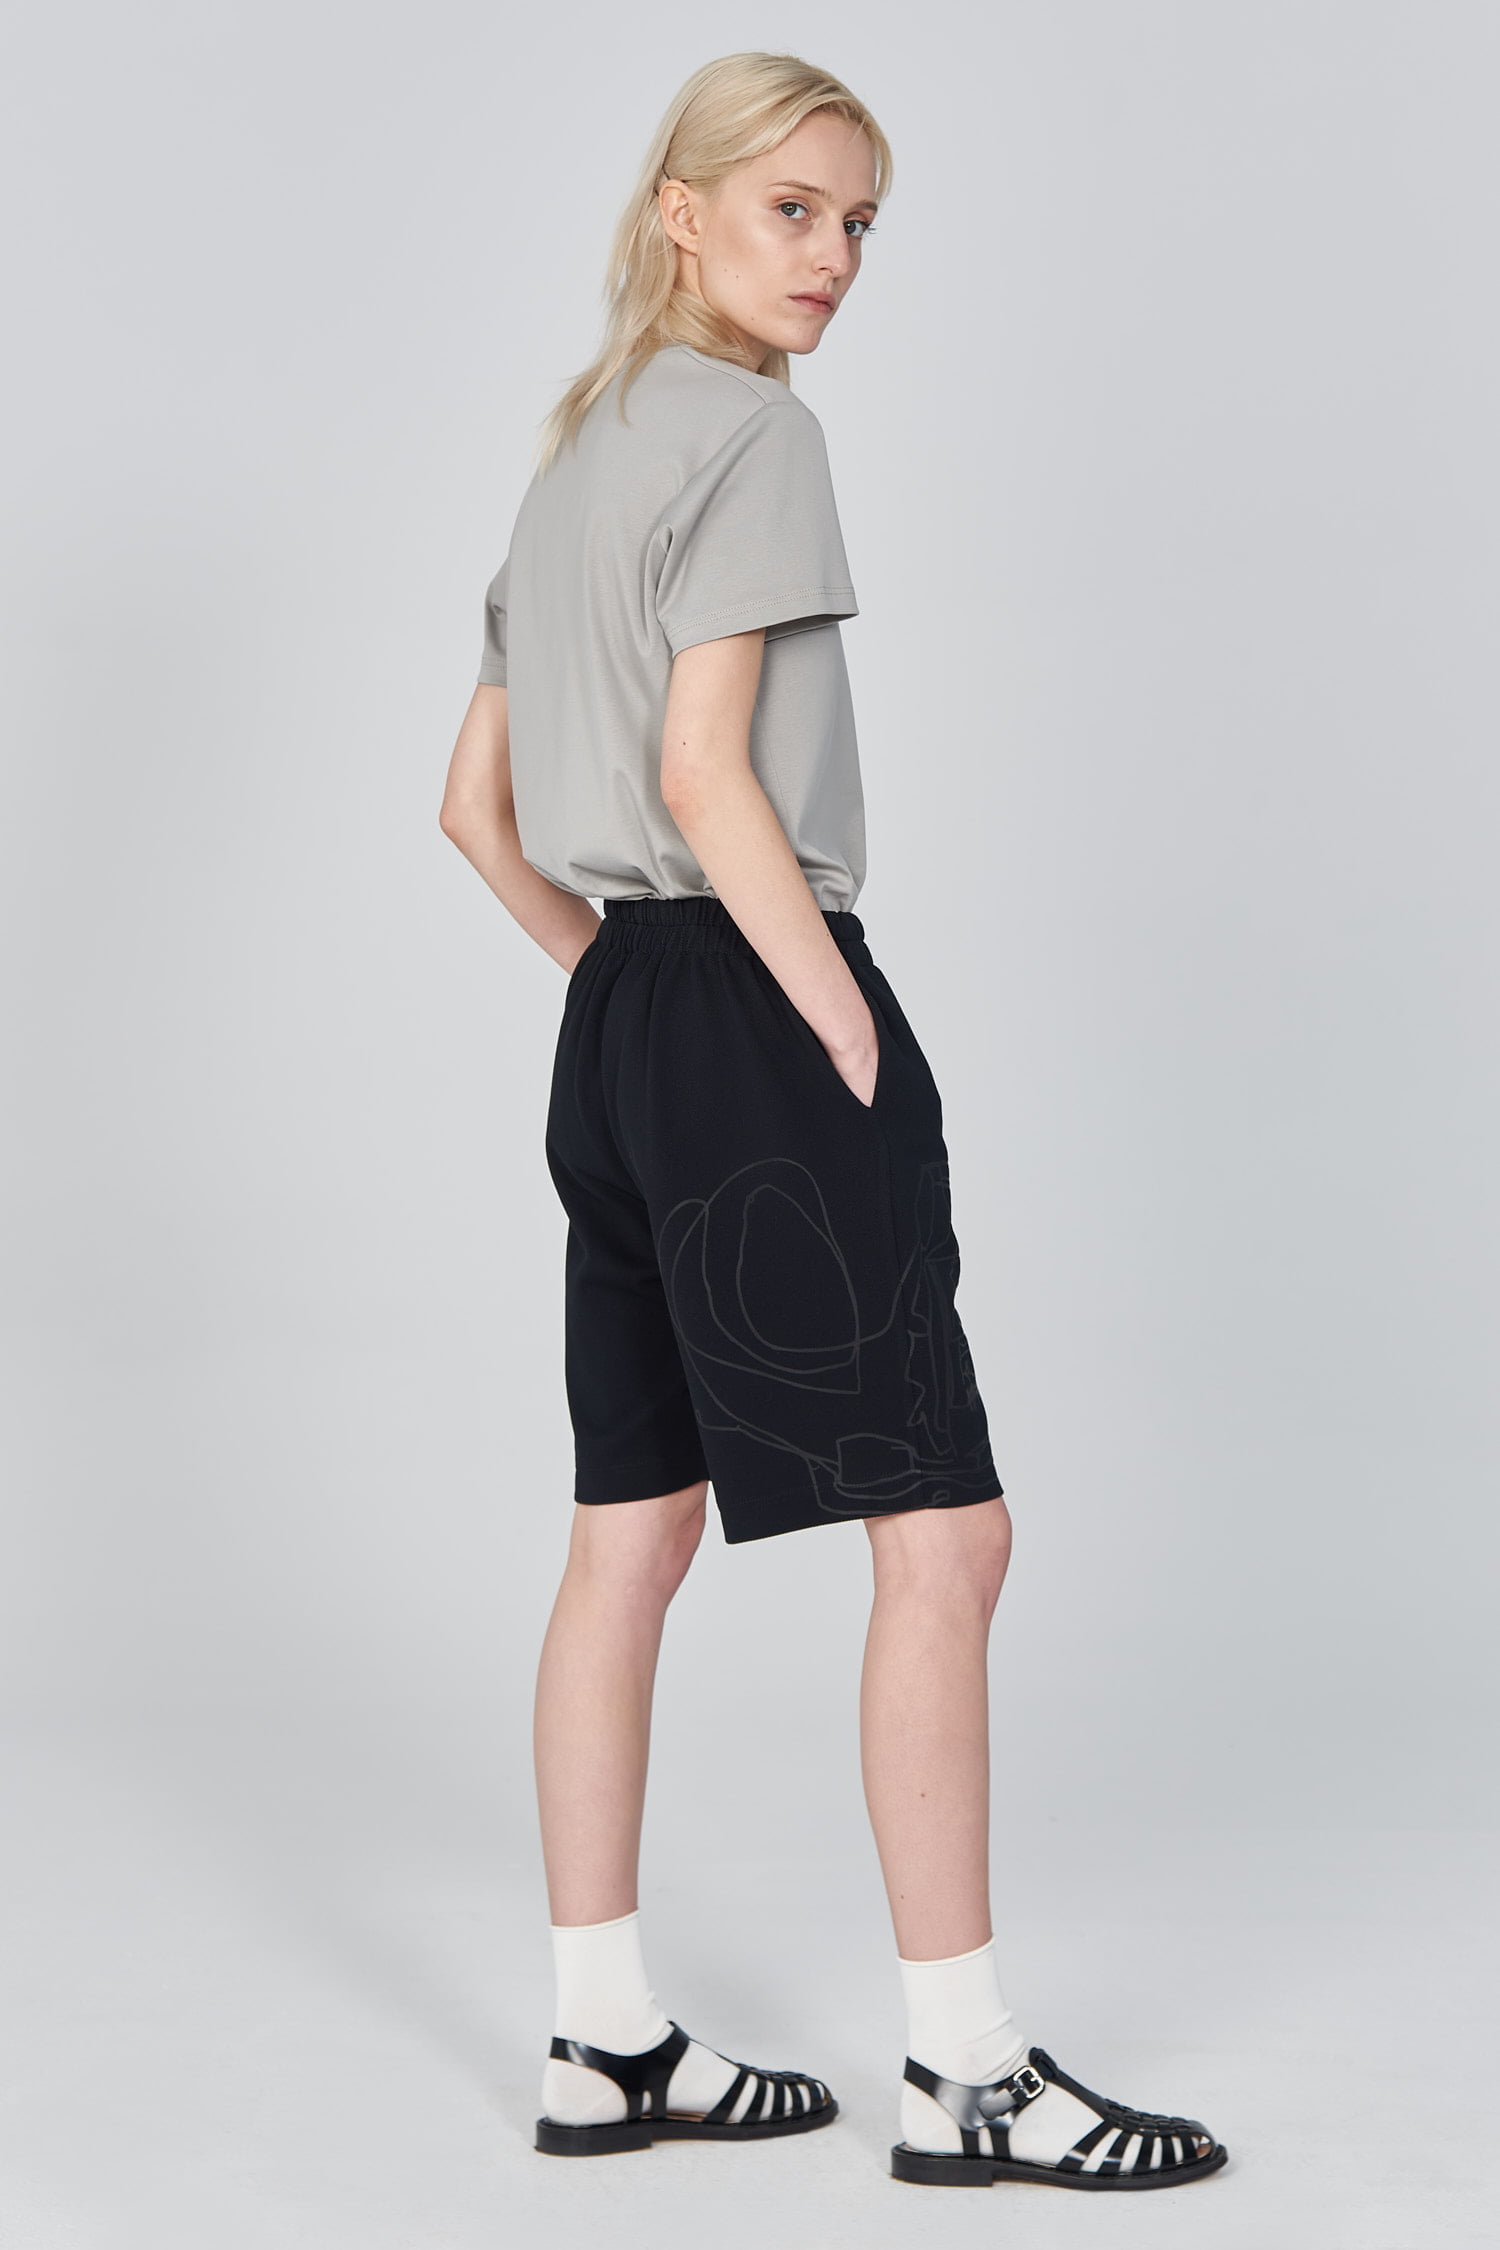 Acephala Ss21 Bermuda Shorts With Graphic Print Side Relaxed